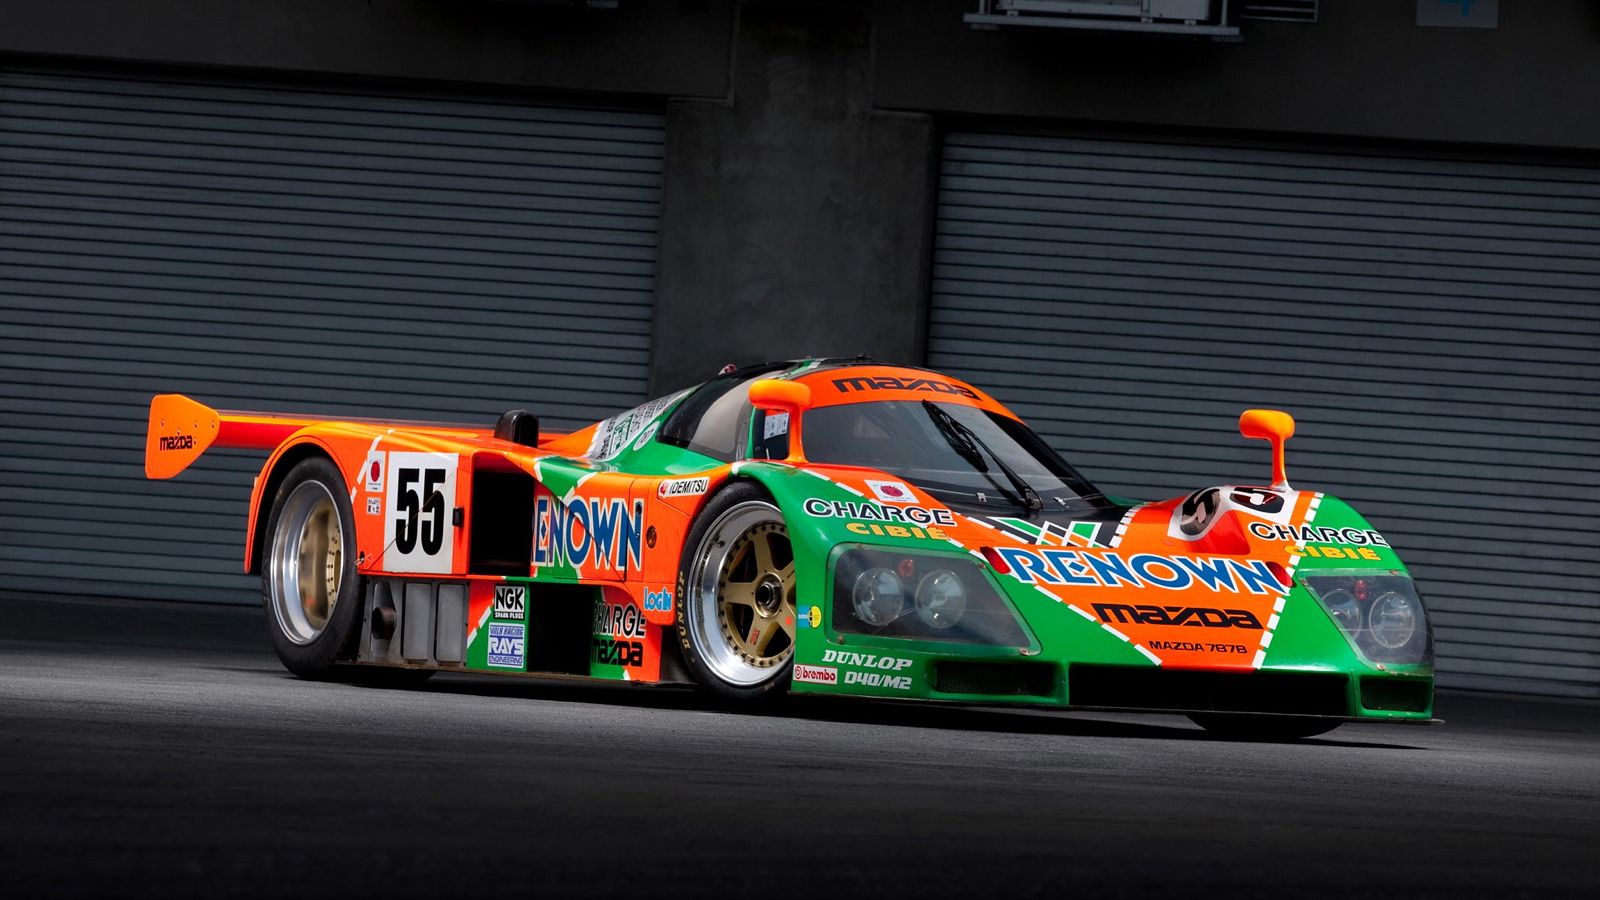 General 1600x900 car Mazda Mazda 787B race cars Le Mans racing frontal view livery Japanese cars